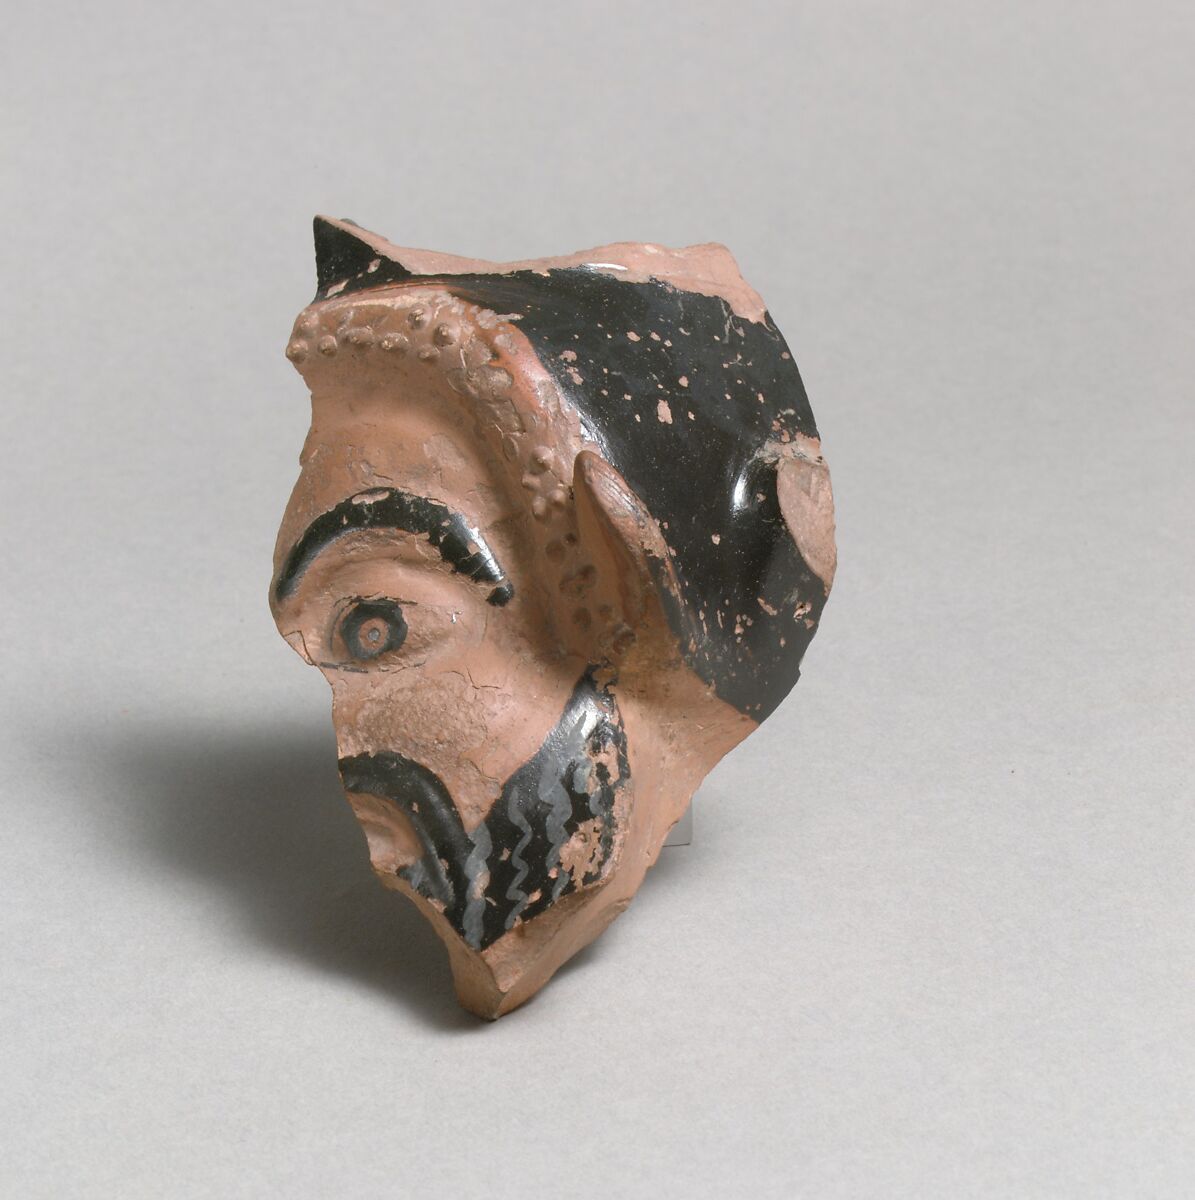 Vase fragment in the form of a satyr's head, Attributed to the Class O: The Sabouroff Class of Head Vases, Terracotta, Greek, Attic 